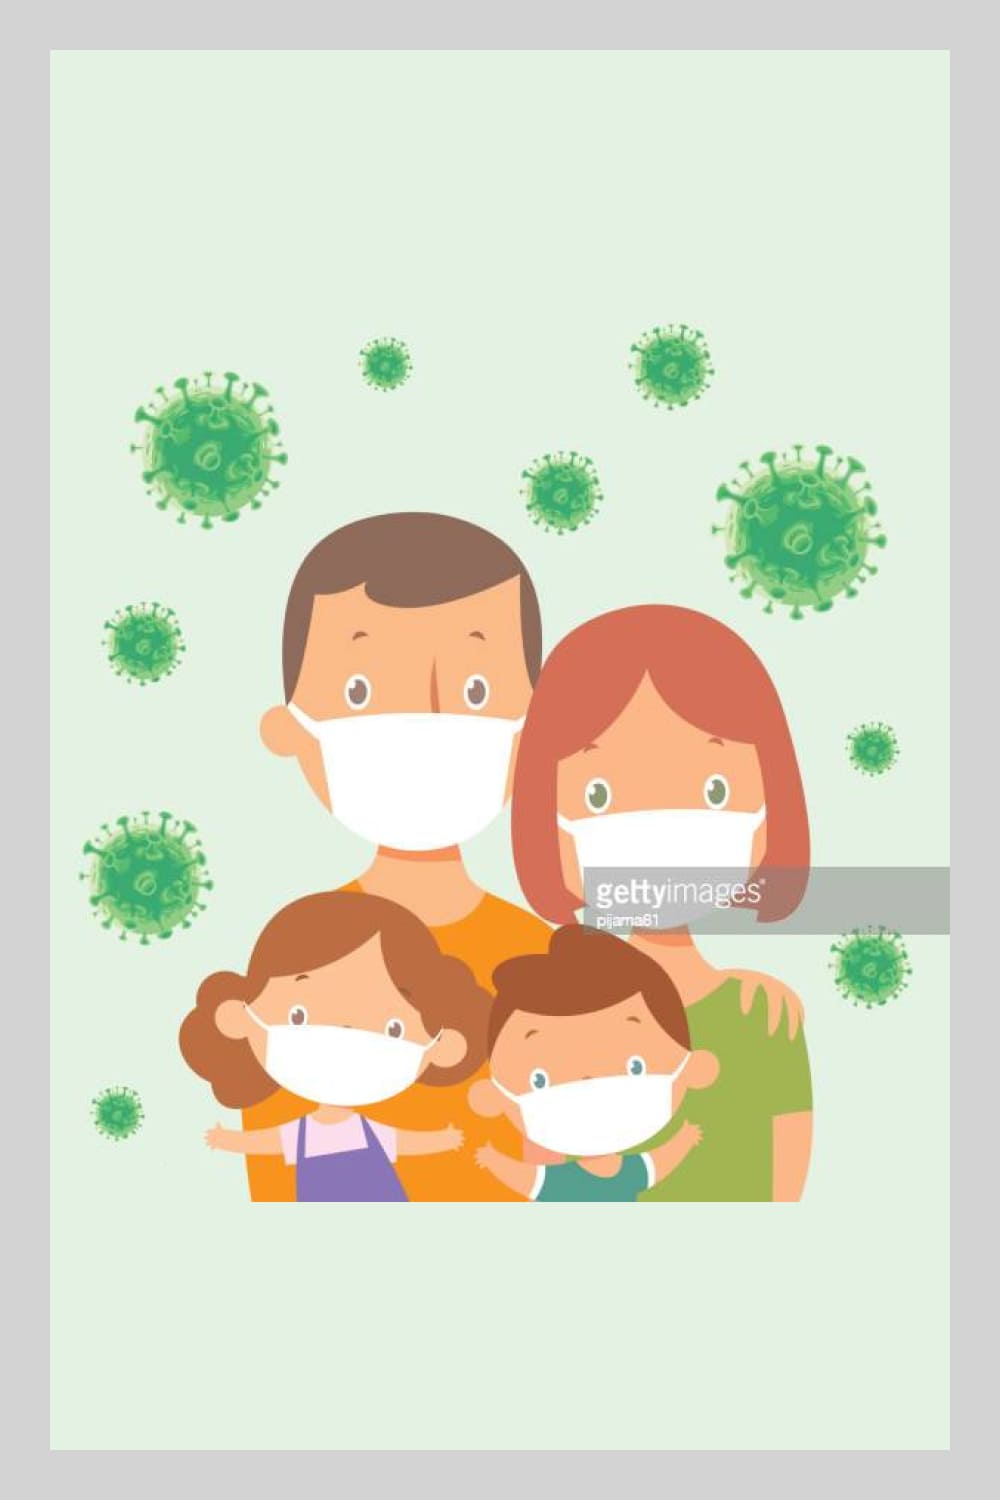 Family with dad mum and two children wears face masks due to coronavirus covid 19 pandemic.